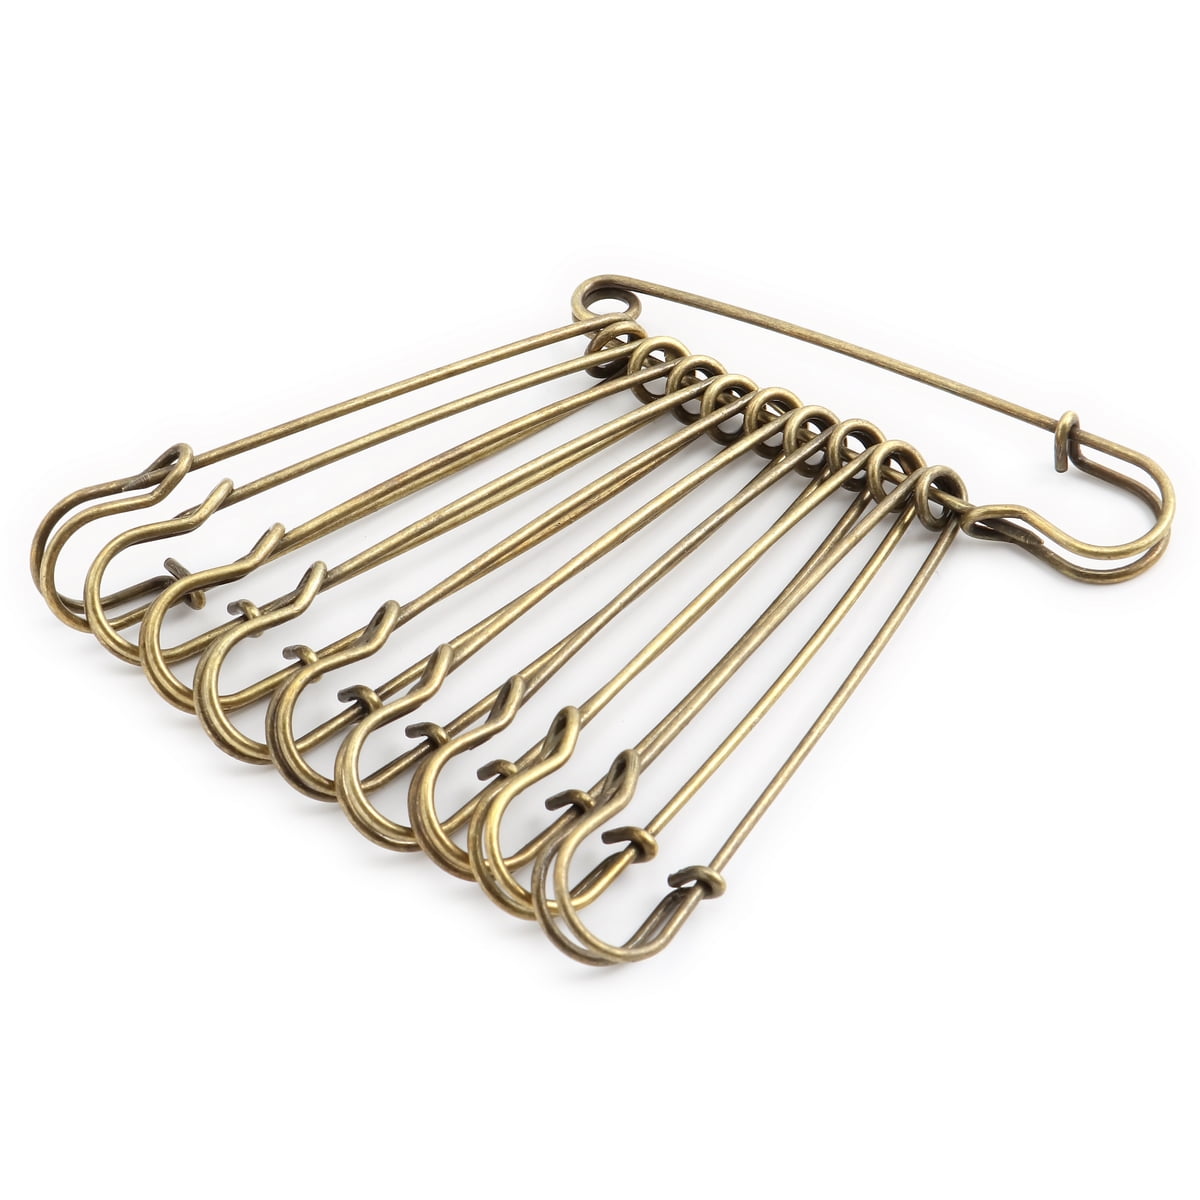 Luxtrada 30pcs Safety Pins Large Heavy Duty Safety Pin 3 inch Stainless Steel Wire Safety Pin Extra Strong & Sturdy Bulk Pins for Blankets, Skirts